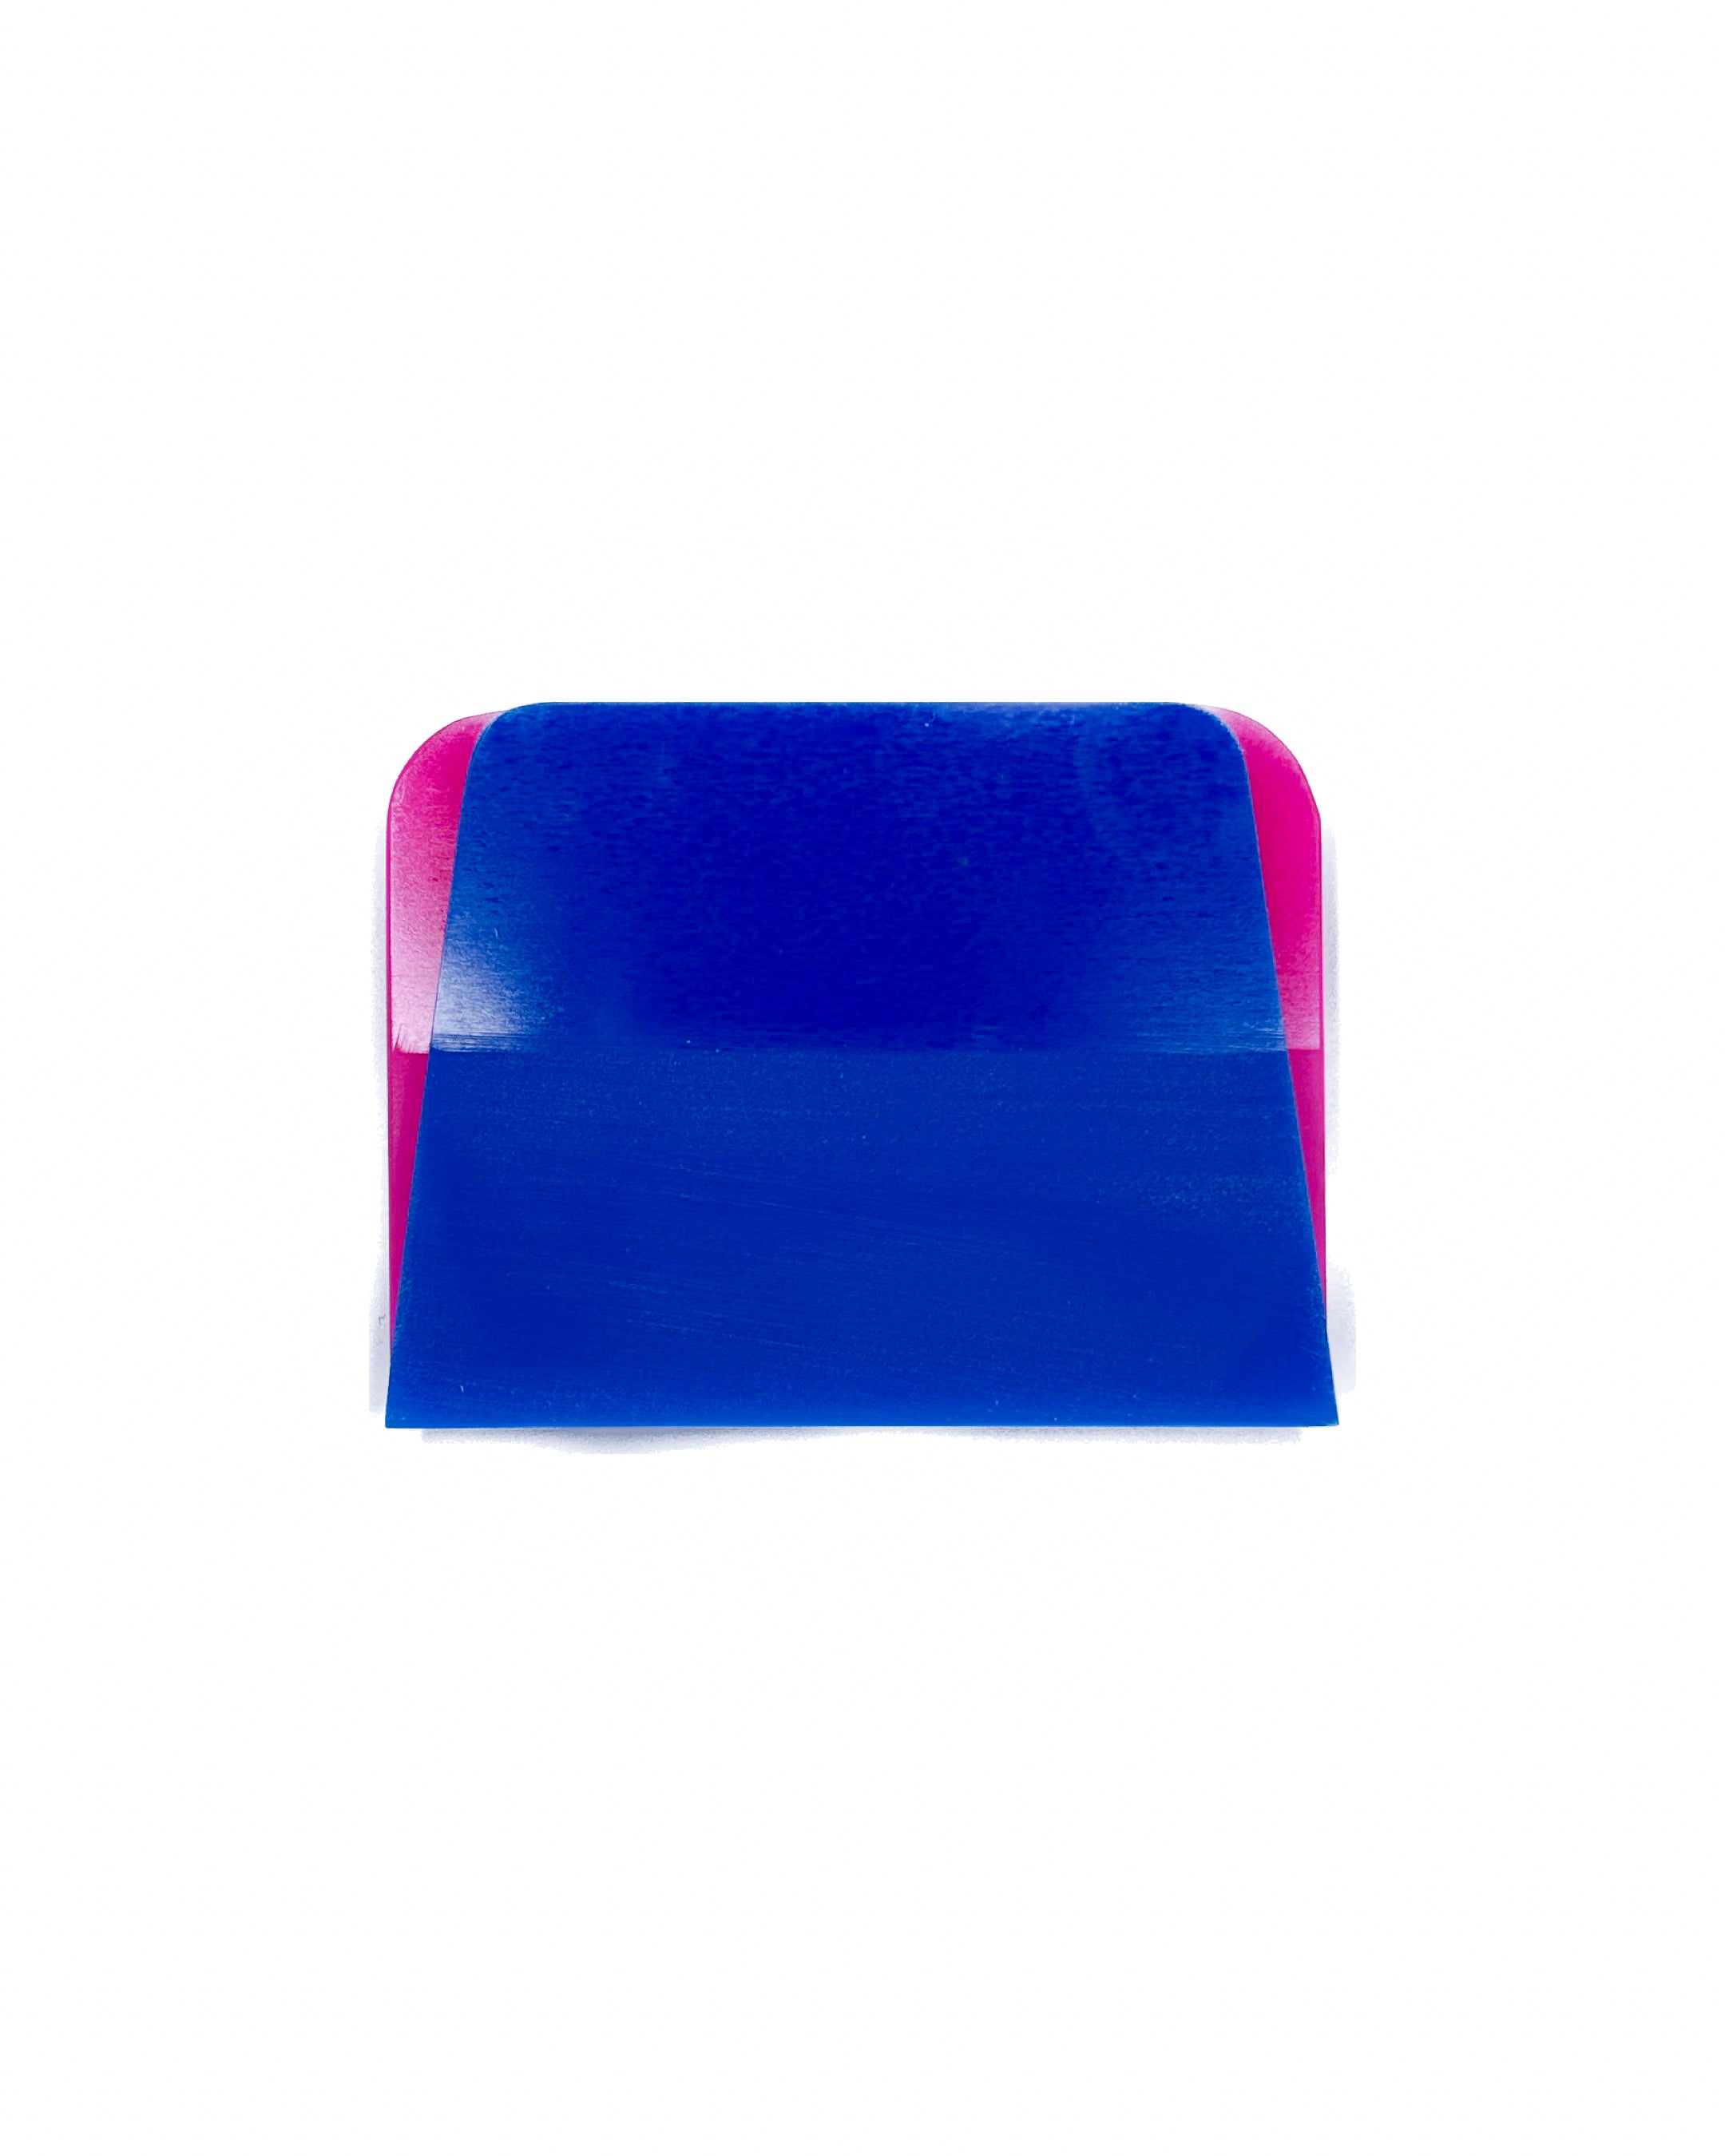 Cropped “Y style” PPF & Tint Squeegee